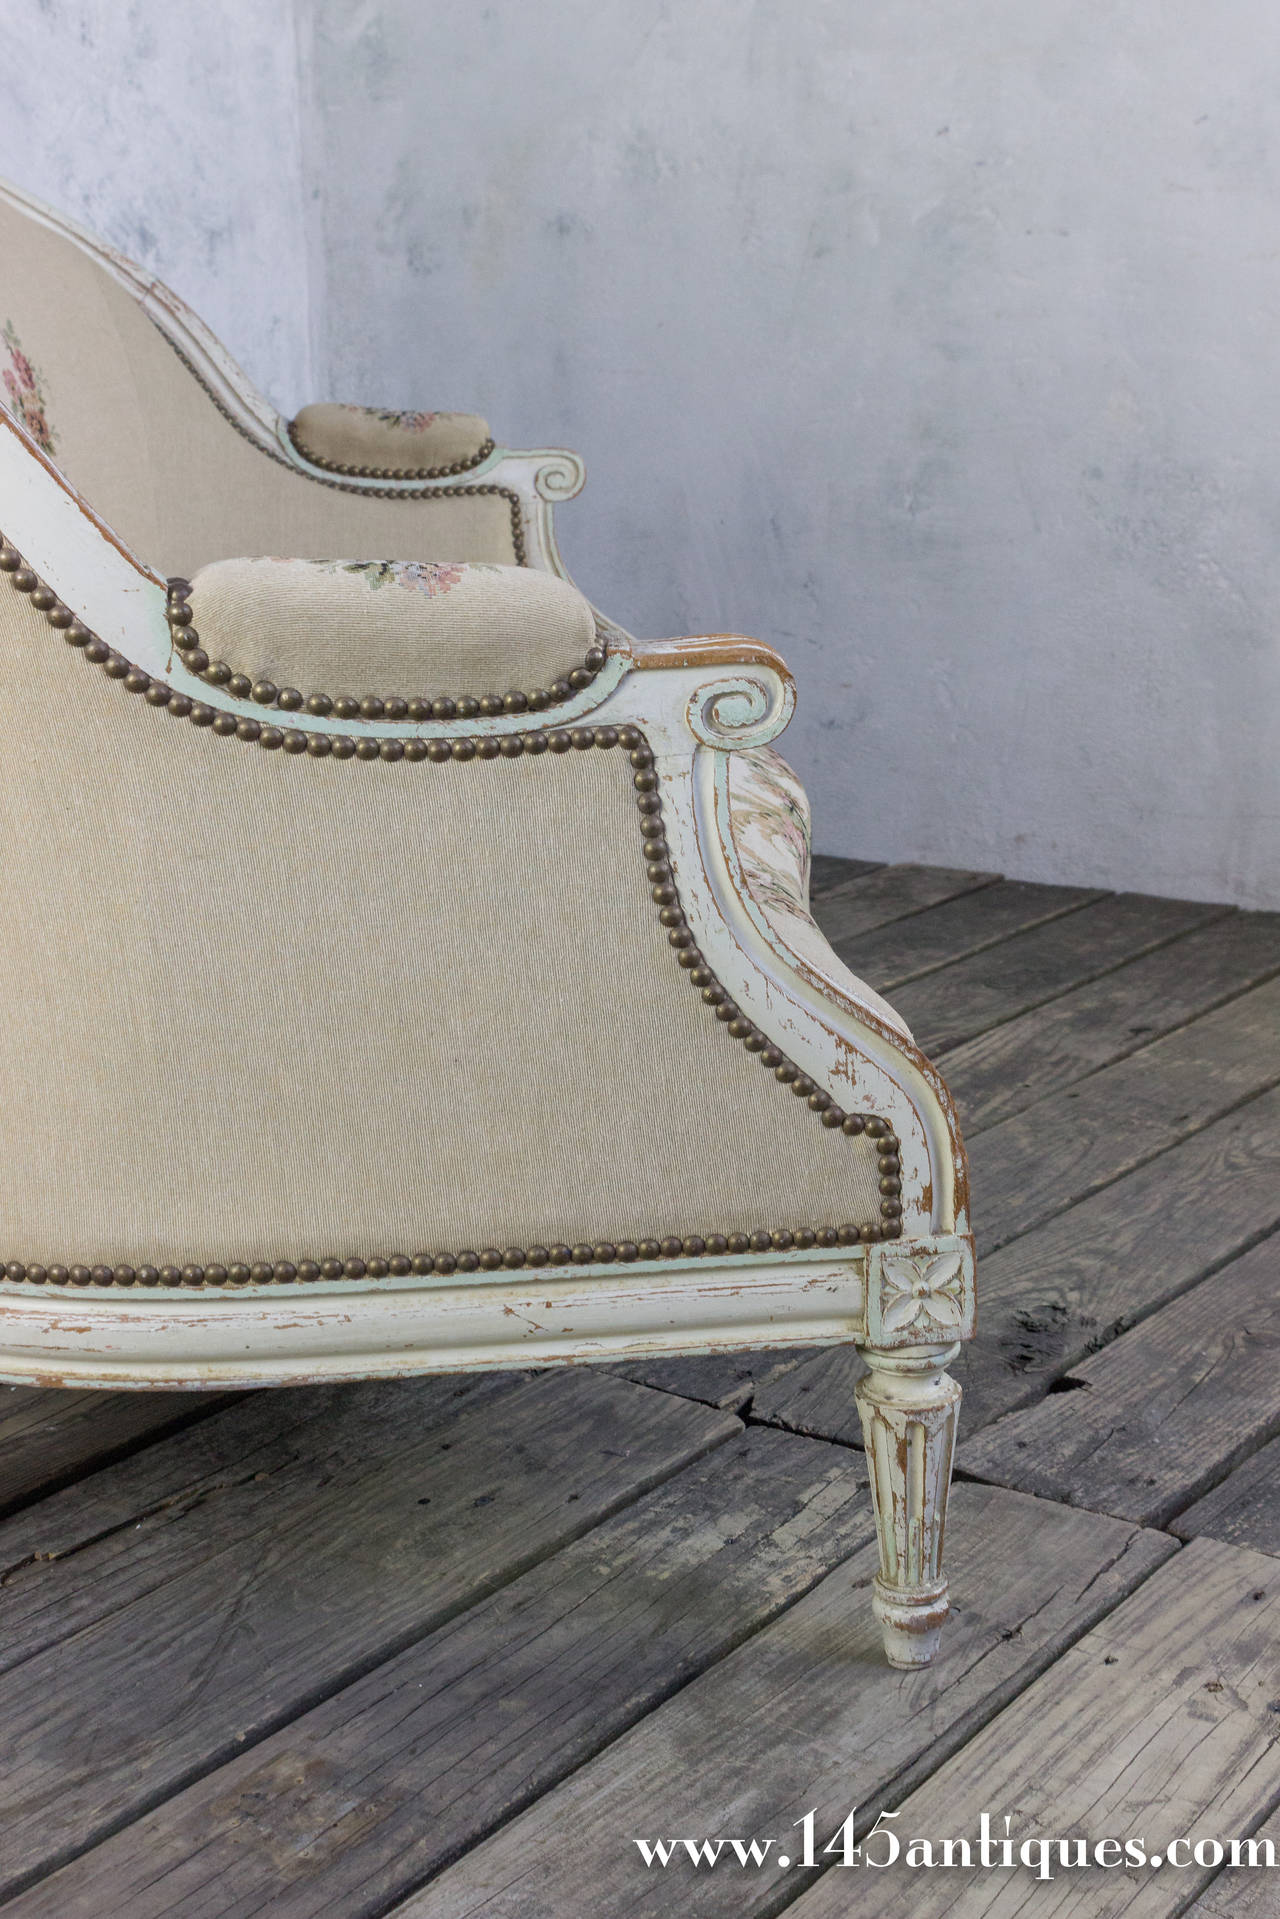 This settee has its original whitewashed patinated finished frame with carved decorations and fluted legs. The fabric is a petit point floral design and in excellent condition. This settee is part of a larger 